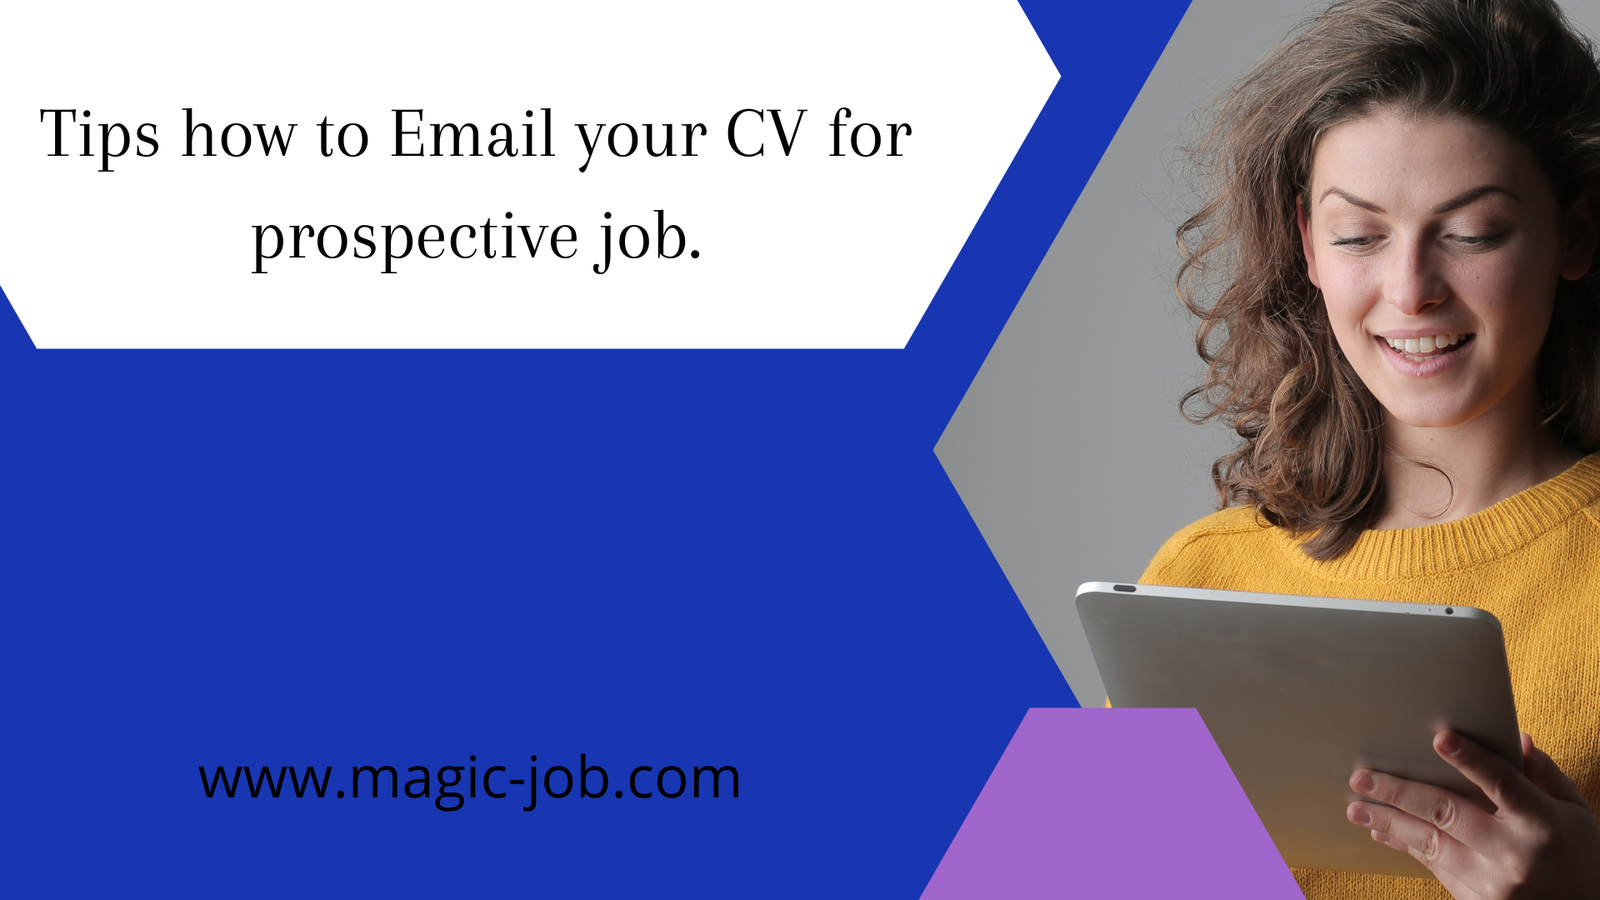 Tips on How to Email Your CV for prospective job! image